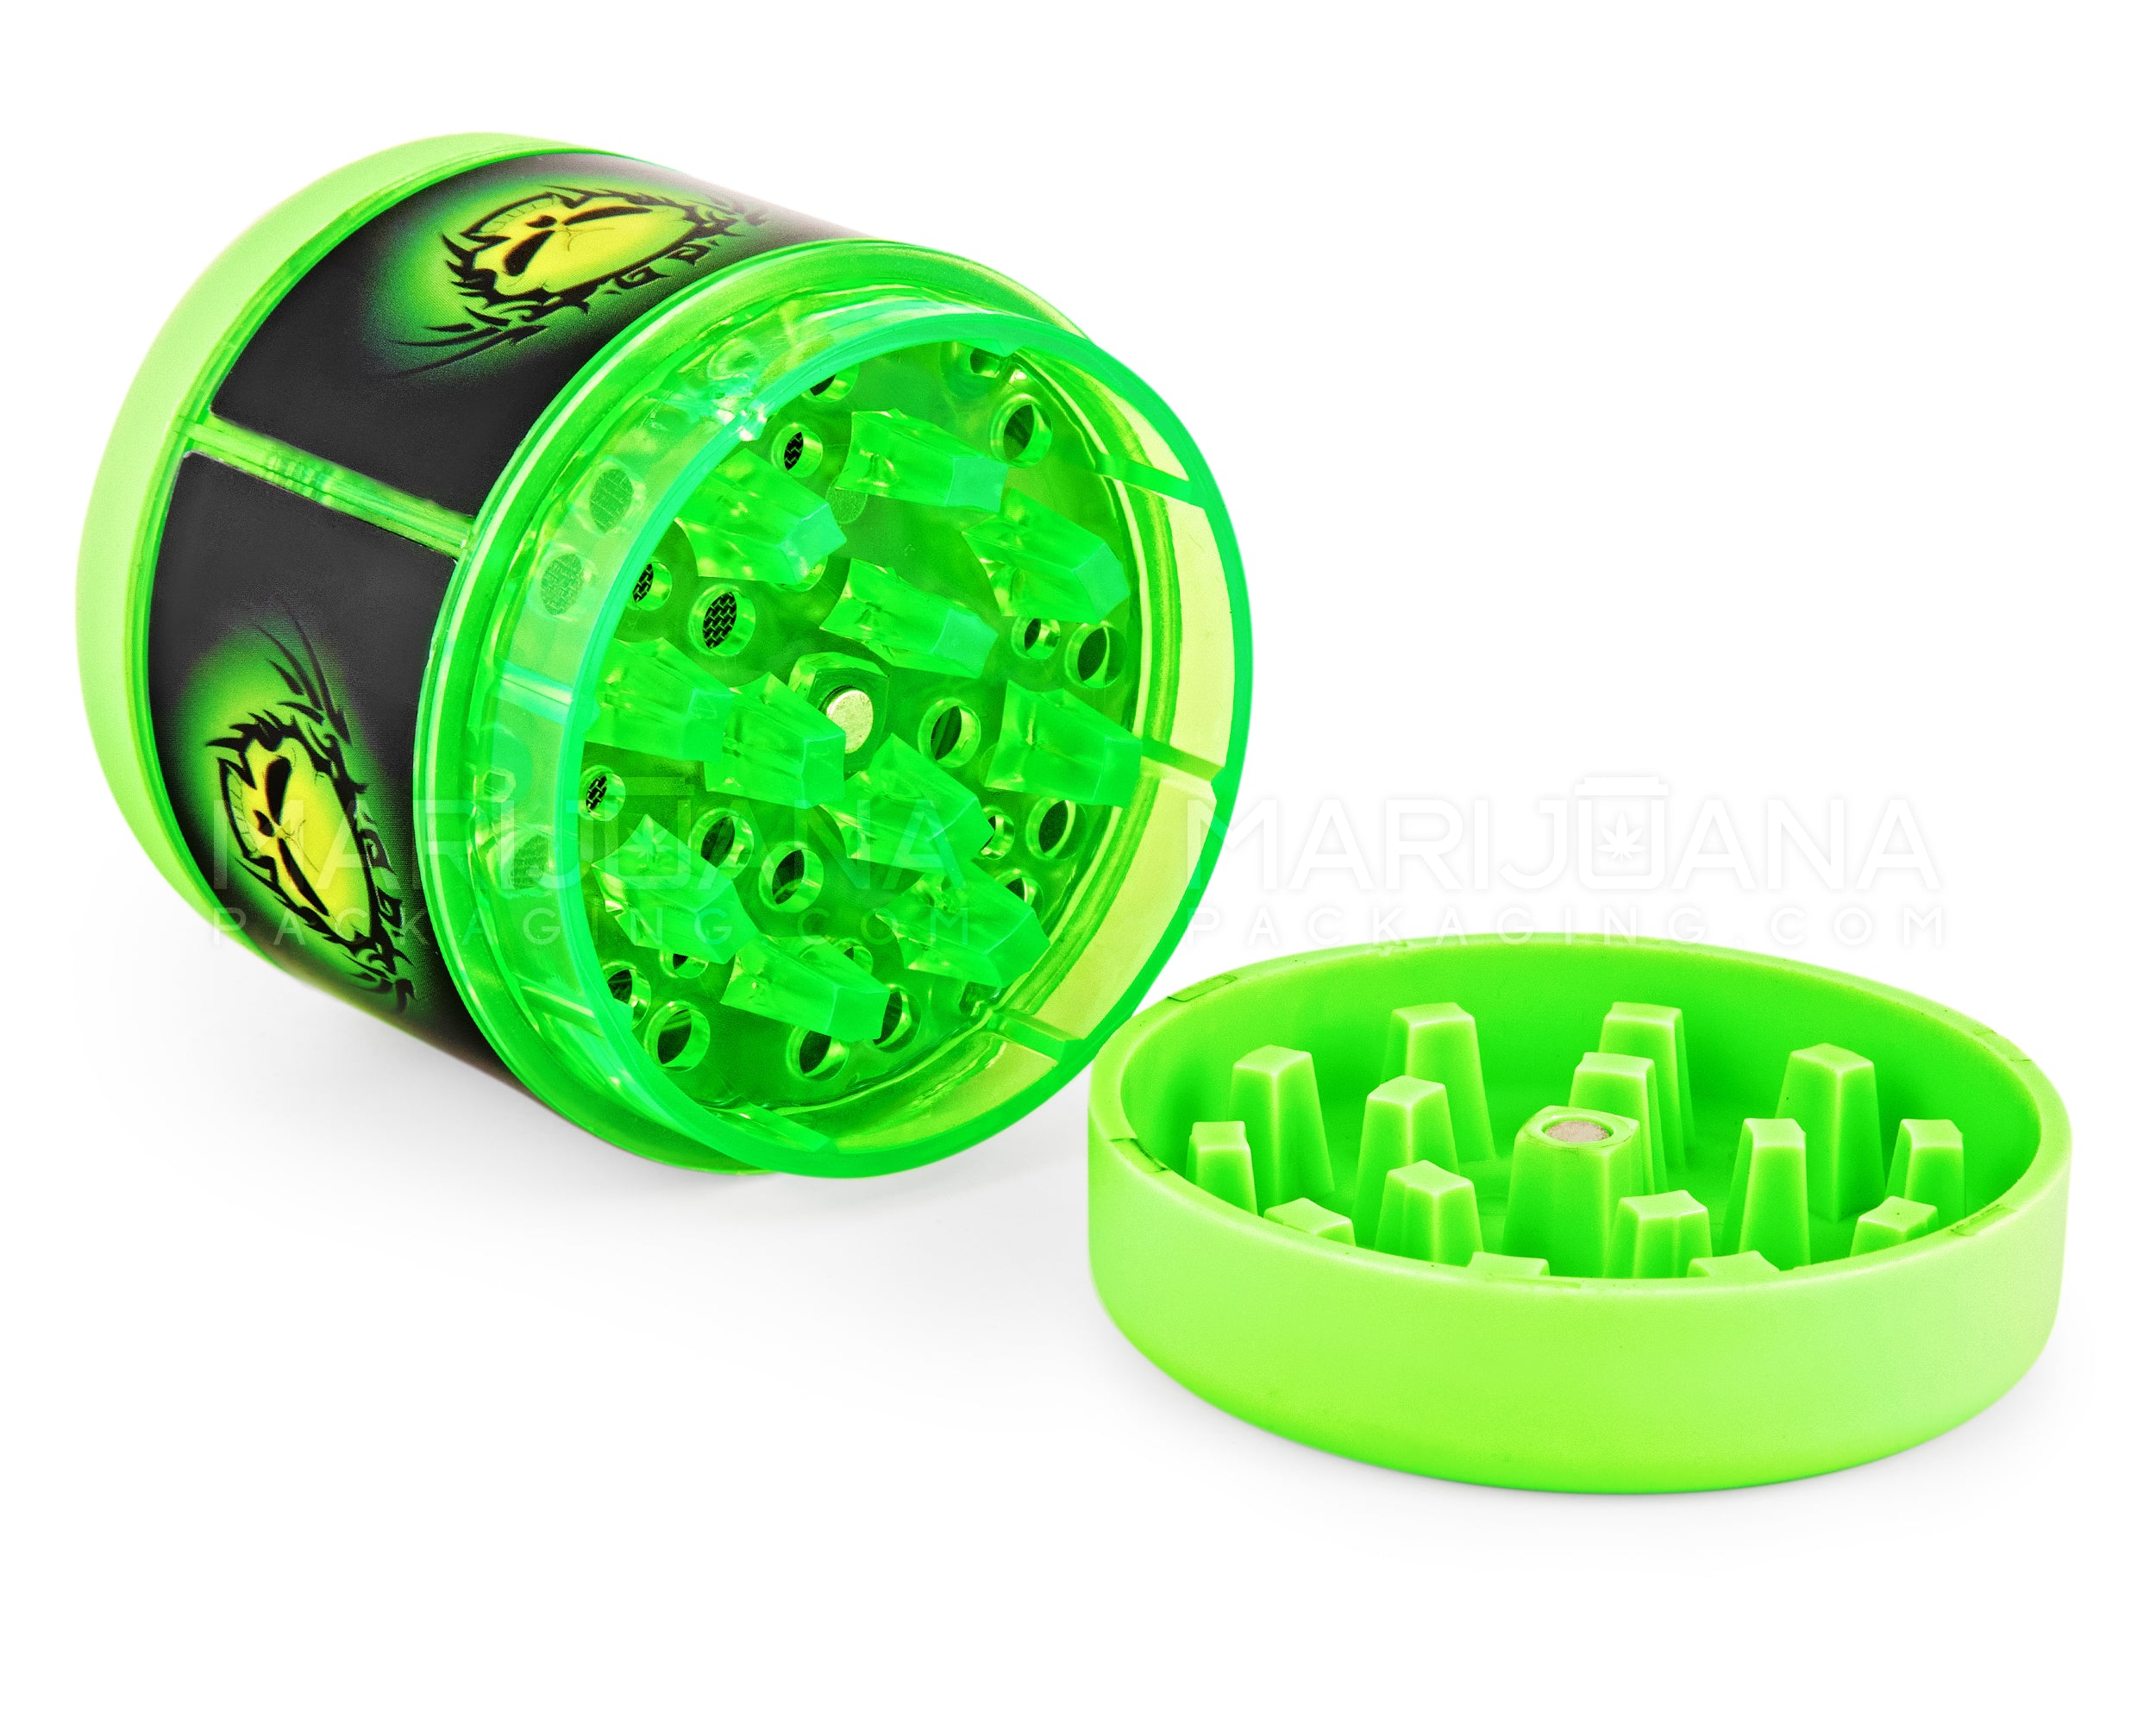 Skull Decal Magnetic Plastic Grinder w/ Screen Catcher | 4 Piece - 54mm - Green - 2